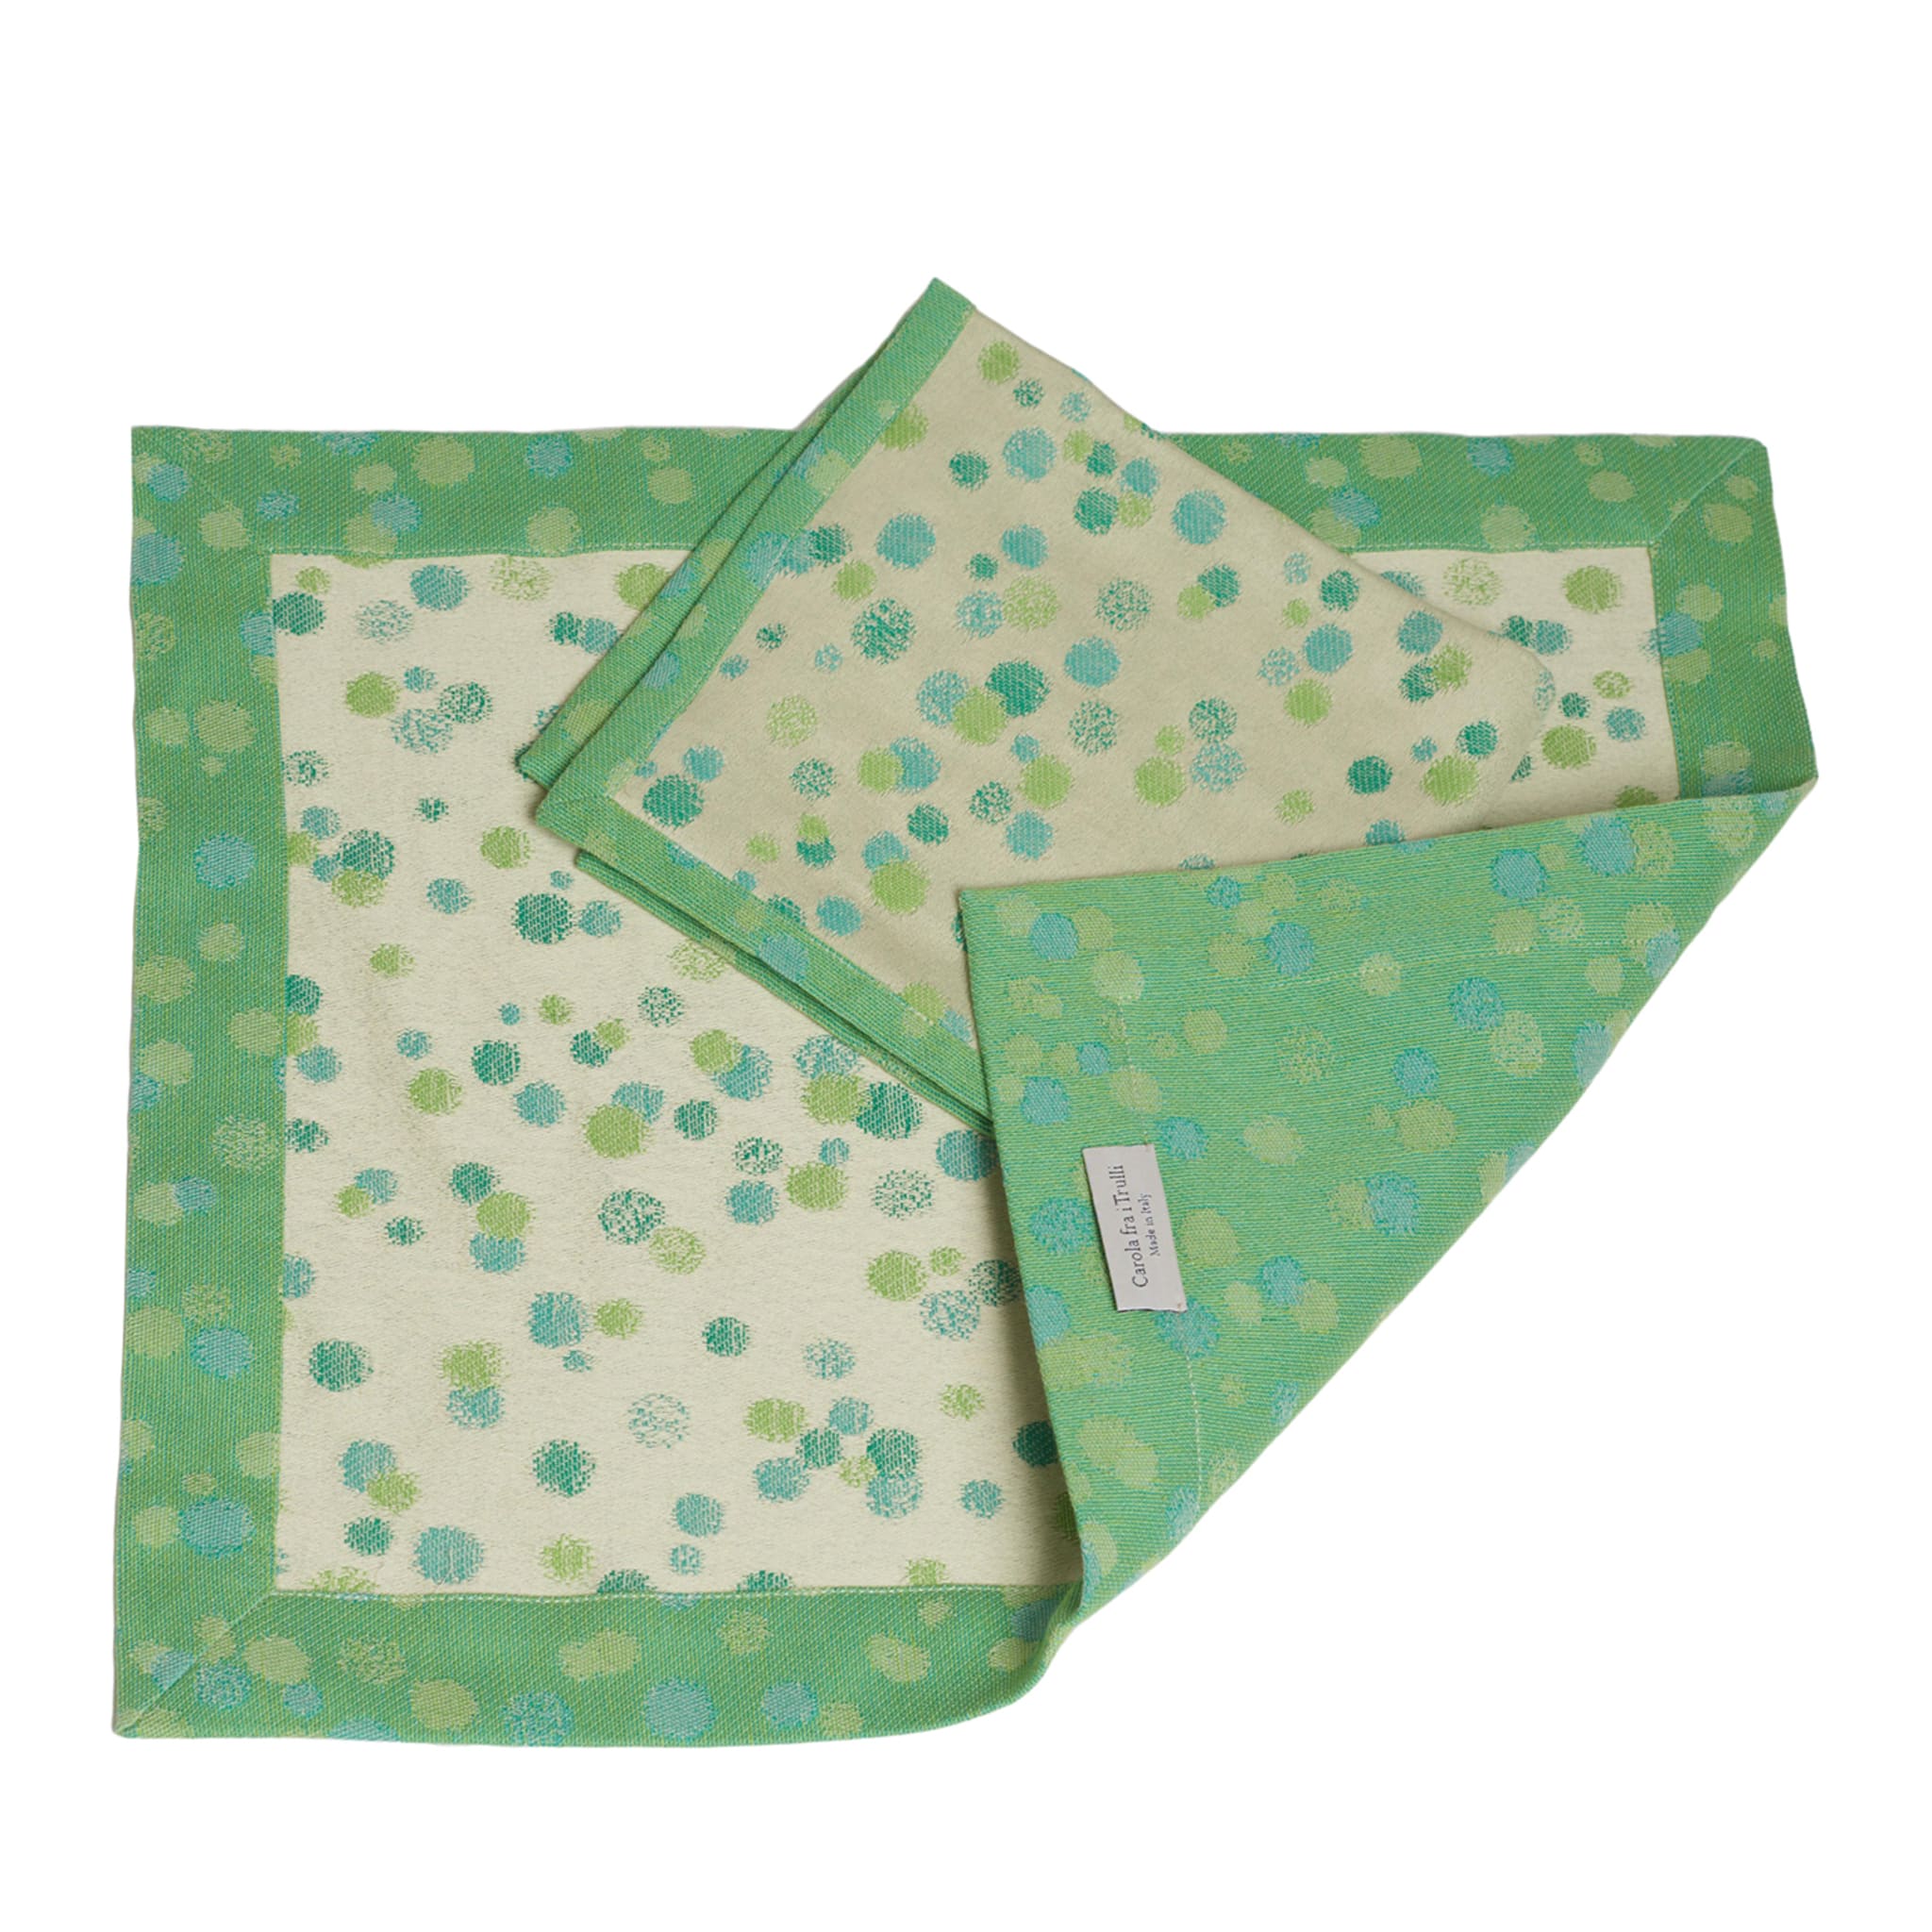 Set of 2 Aqua and Green Placemats with napkins - Main view